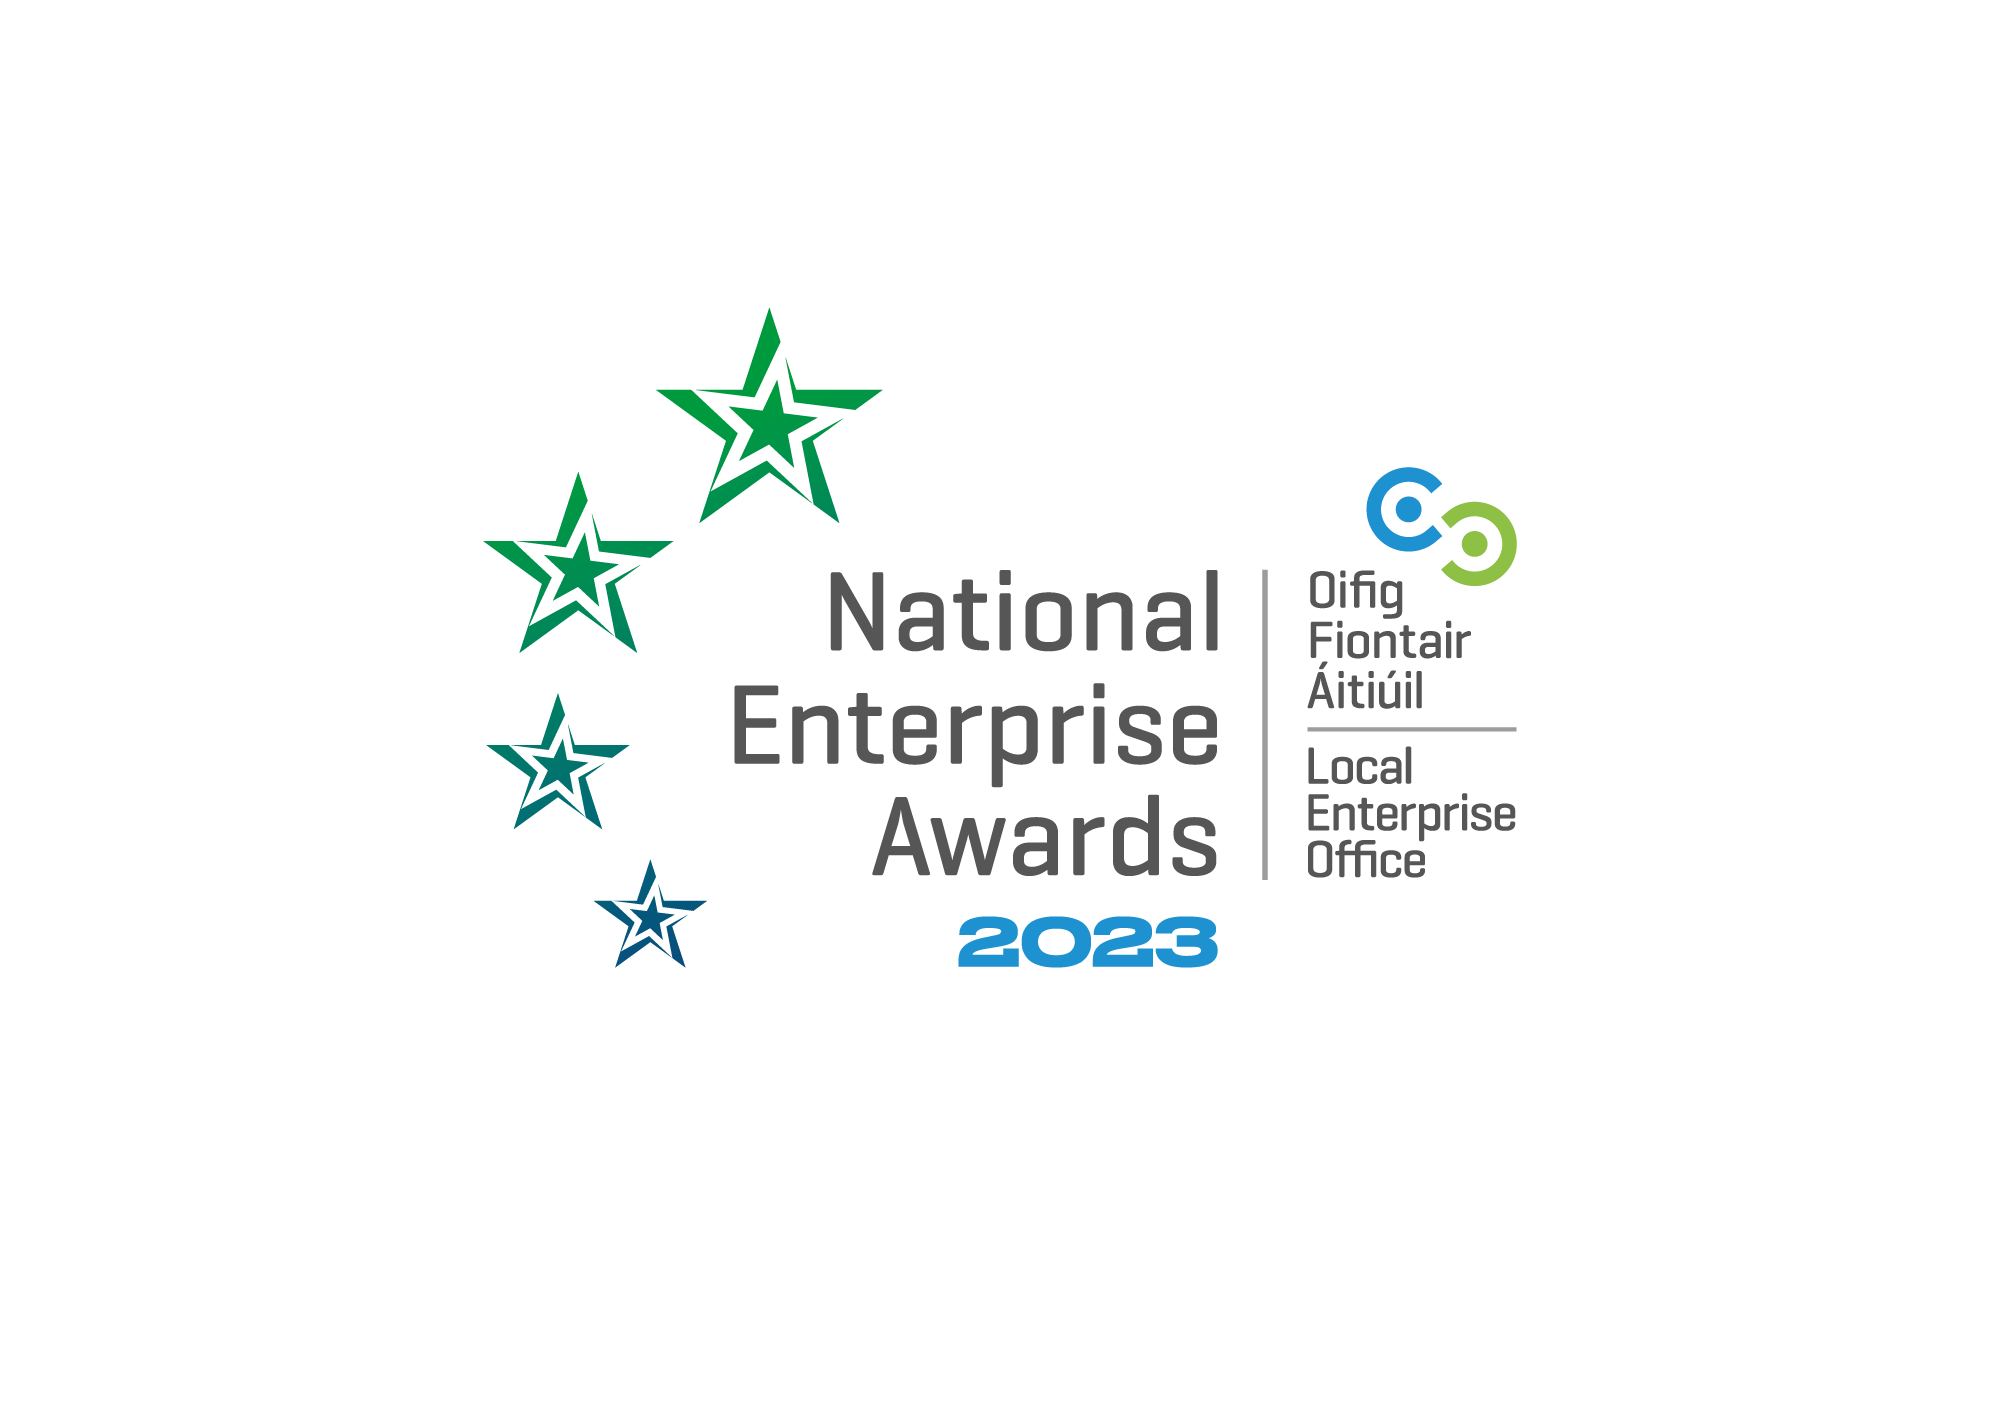 Local Enterprise Office Monaghan announces the County Recipient of the National Enterprise Awards